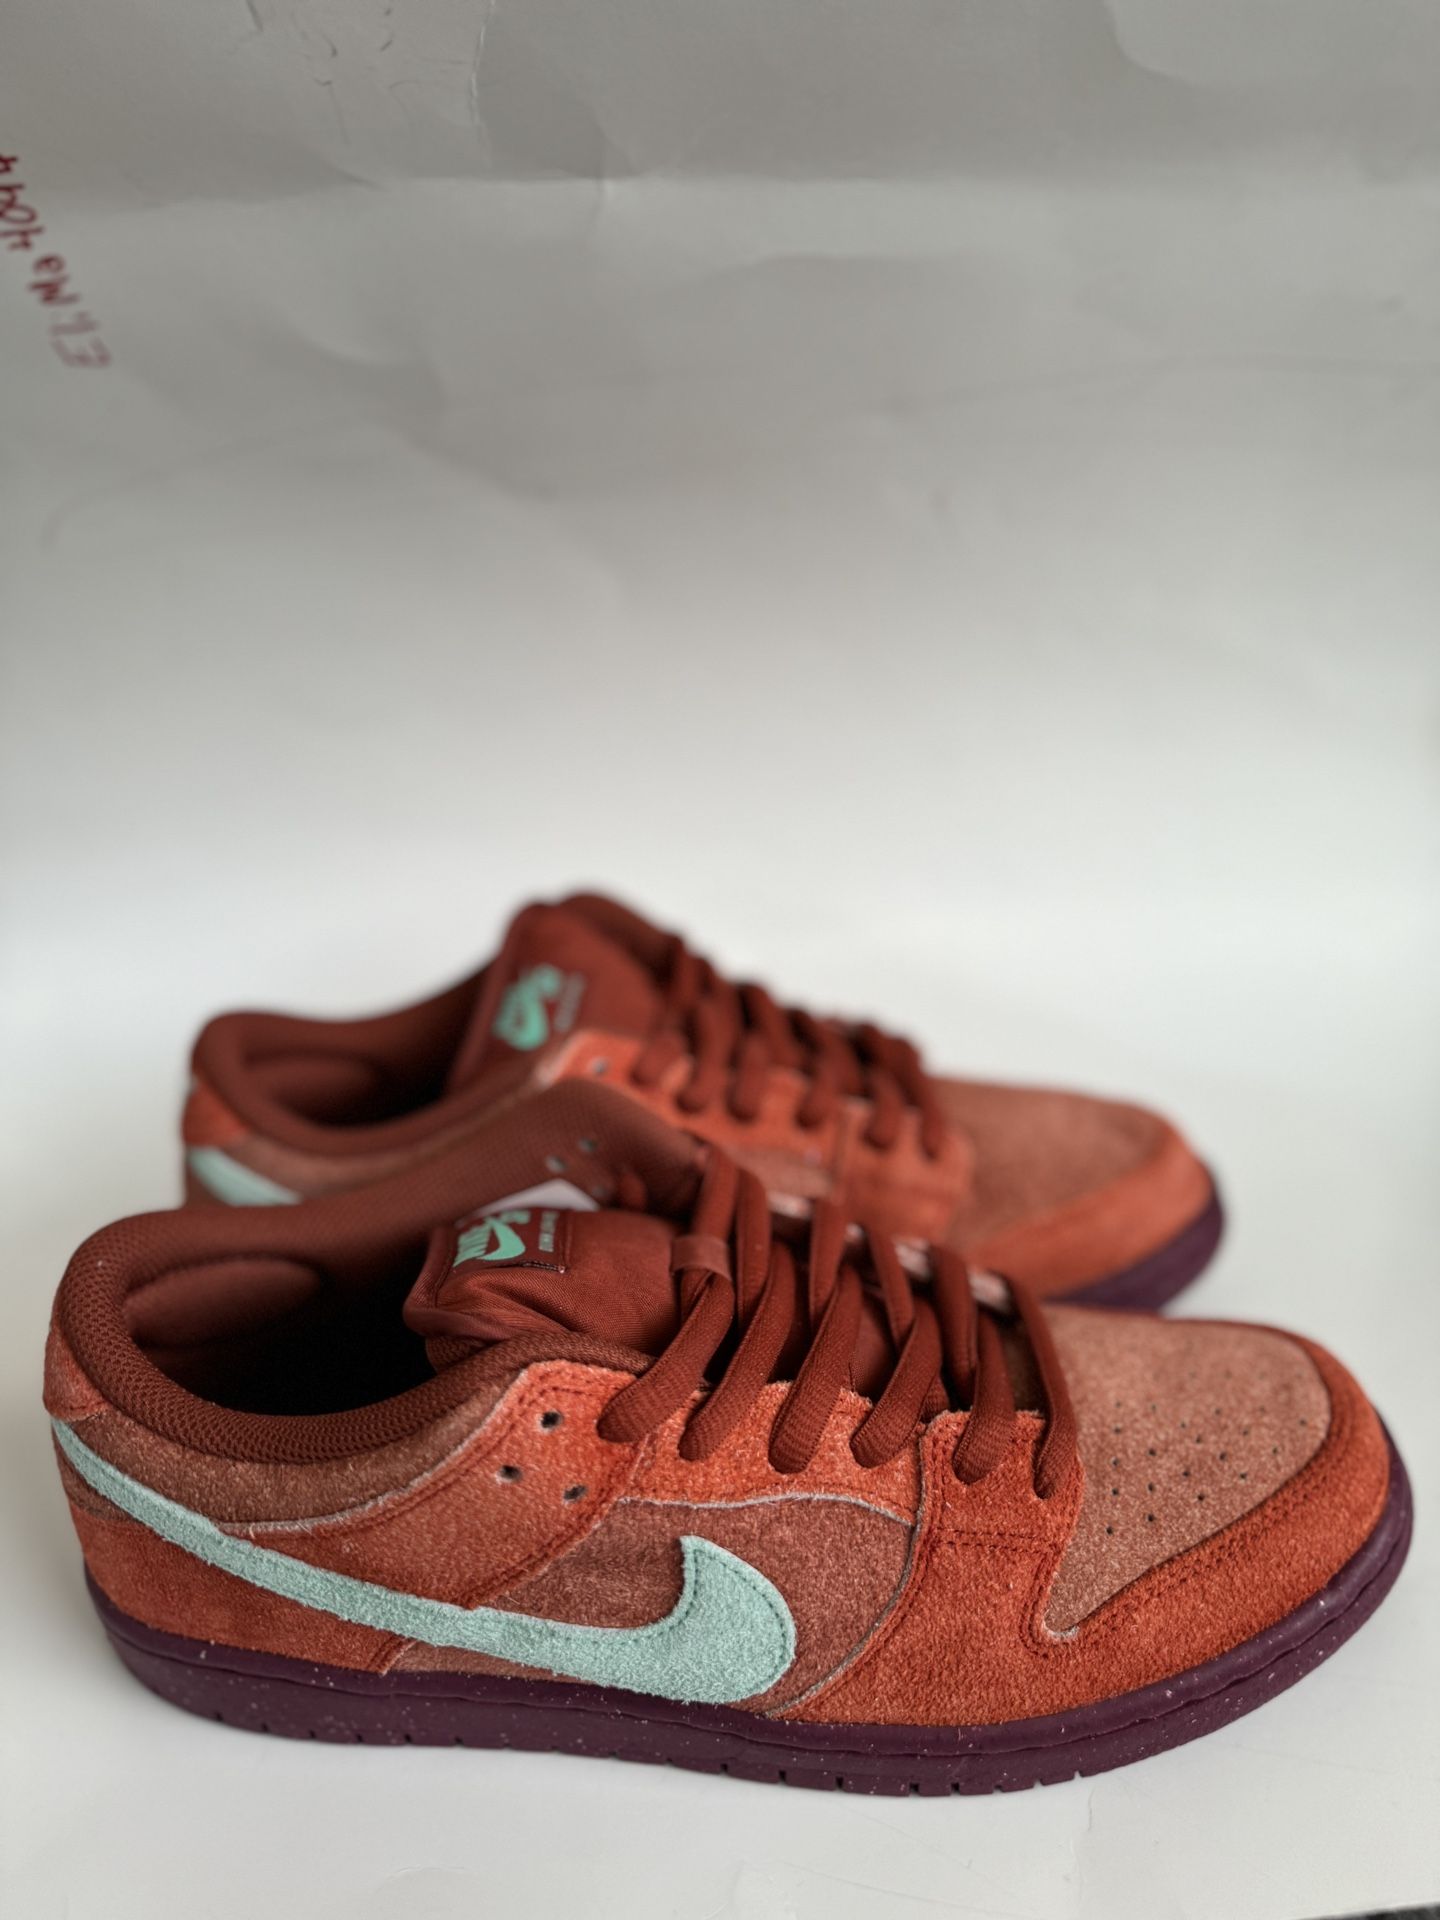 Nike SB Dunk Low "Mystic Red Rosewood" Size 10